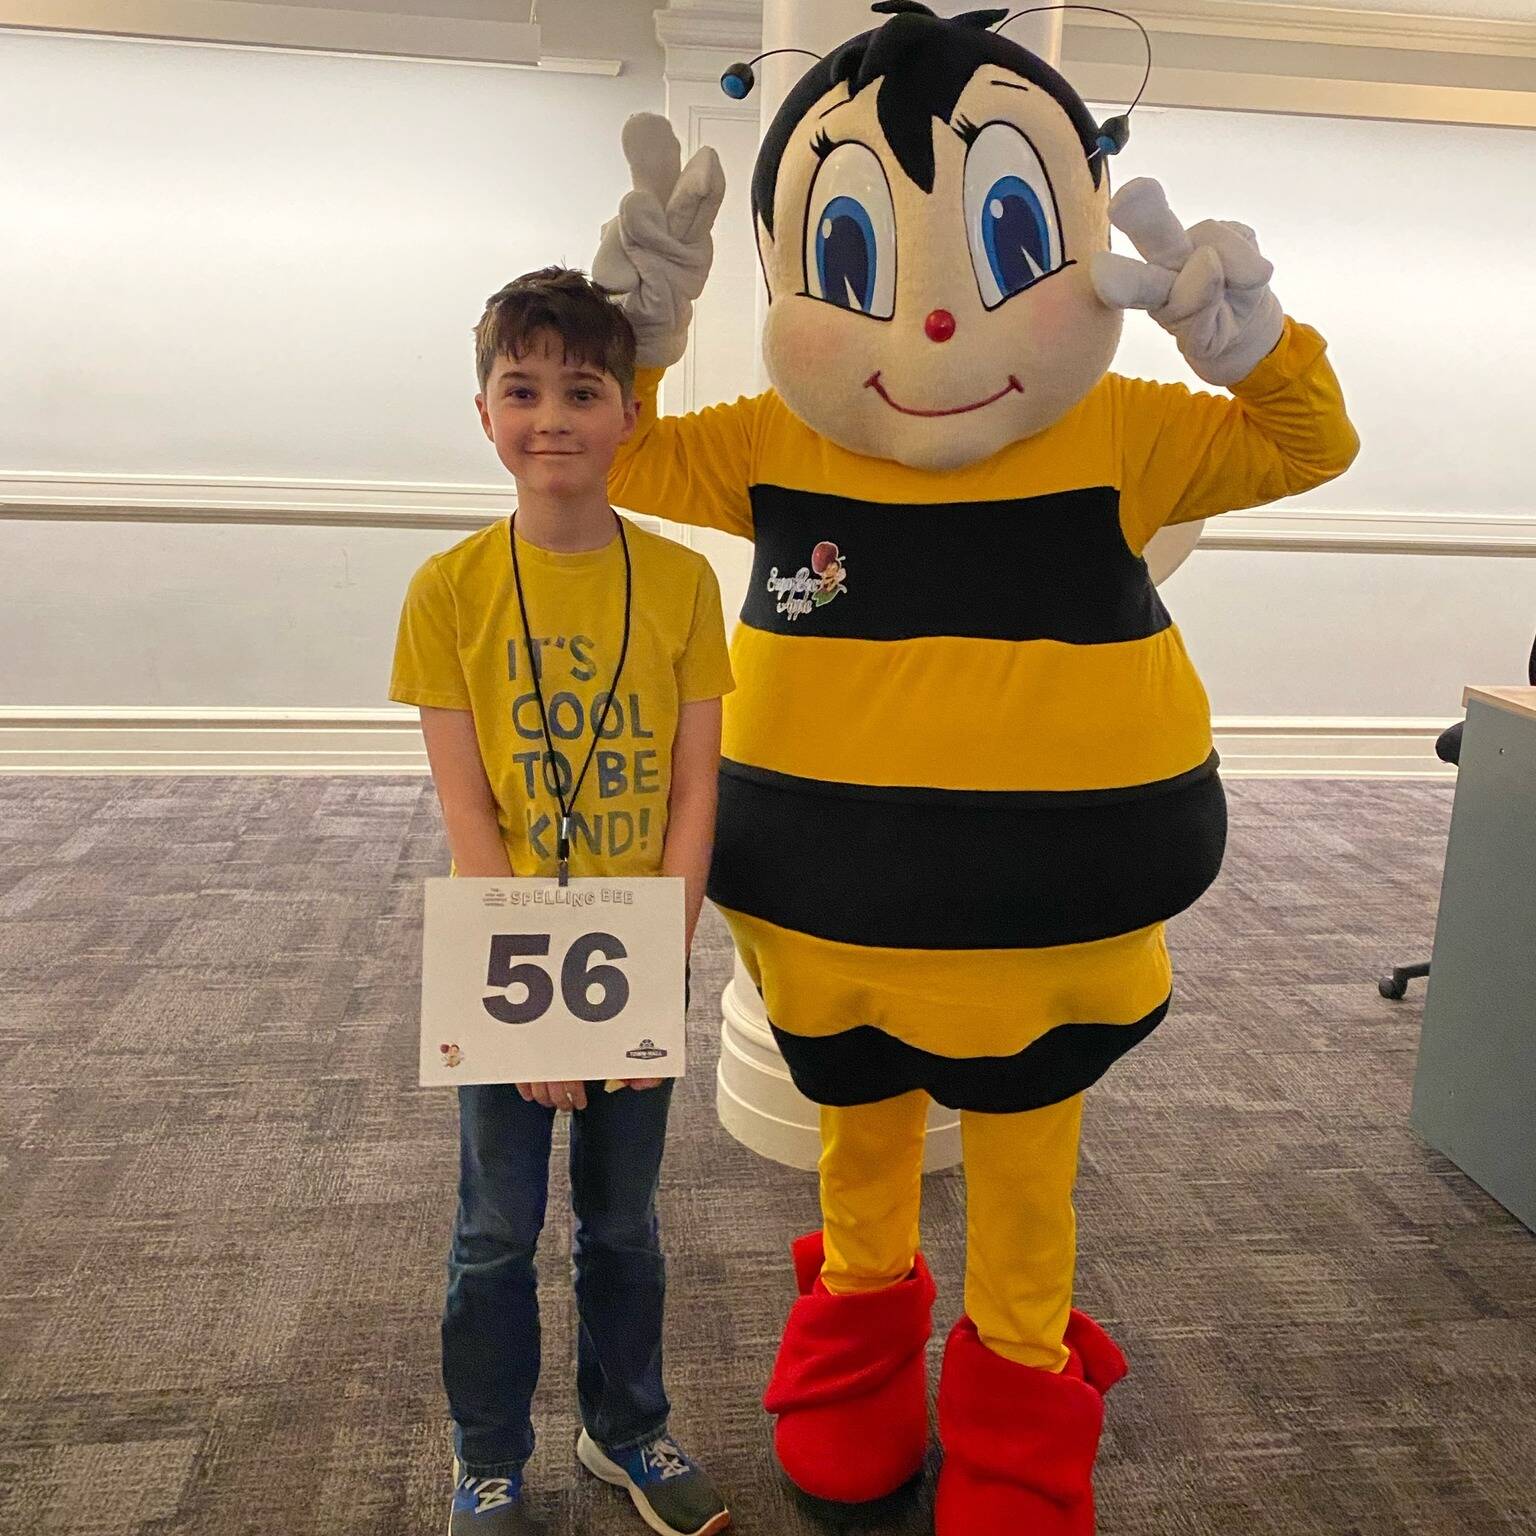 Declan Mallady, a fifth-grader from Snoqualmie Elementary School, won the Regional Spelling Bee of King and Snohomish County on March 30, outspelling 73 competitors. The win qualifies Mallady for the Scripps National Spelling Bee in Washington, D.C., this May. Photo courtesy of Snoqualmie Valley School District